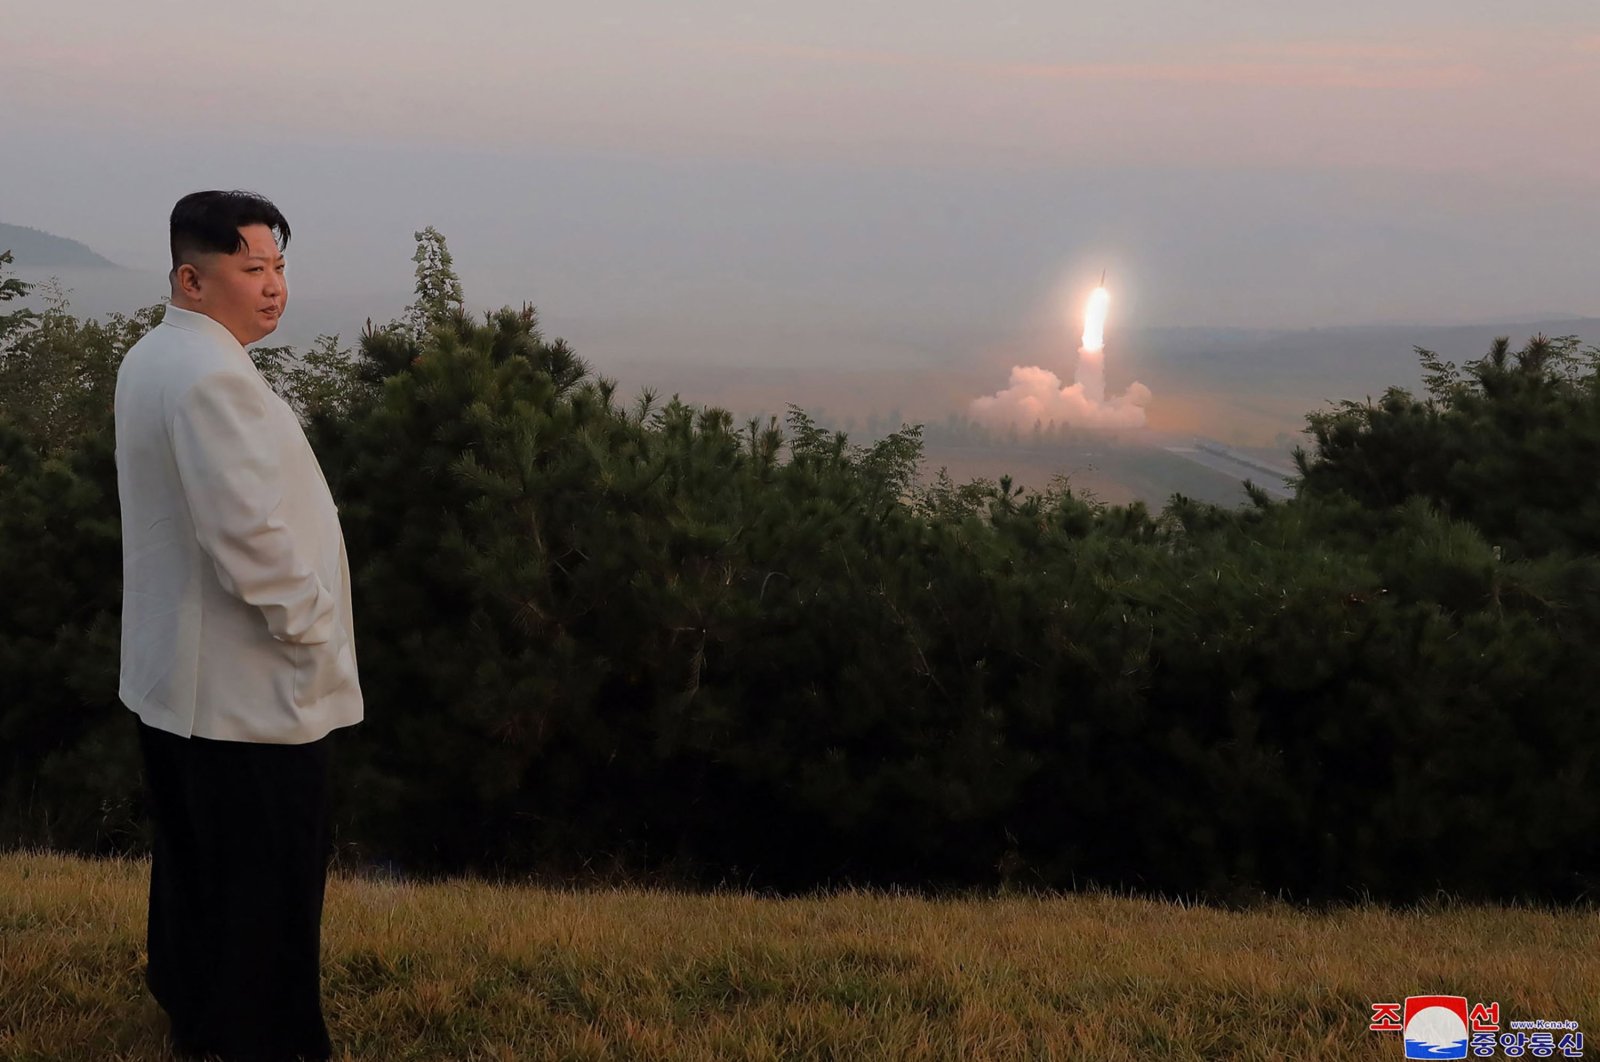 This undated picture released by North Korea&#039;s official Korean Central News Agency (KCNA) on Oct. 10, 2022 shows North Korea&#039;s leader Kim Jong Un monitoring a missile launch at an undisclosed location. (AFP Photo)